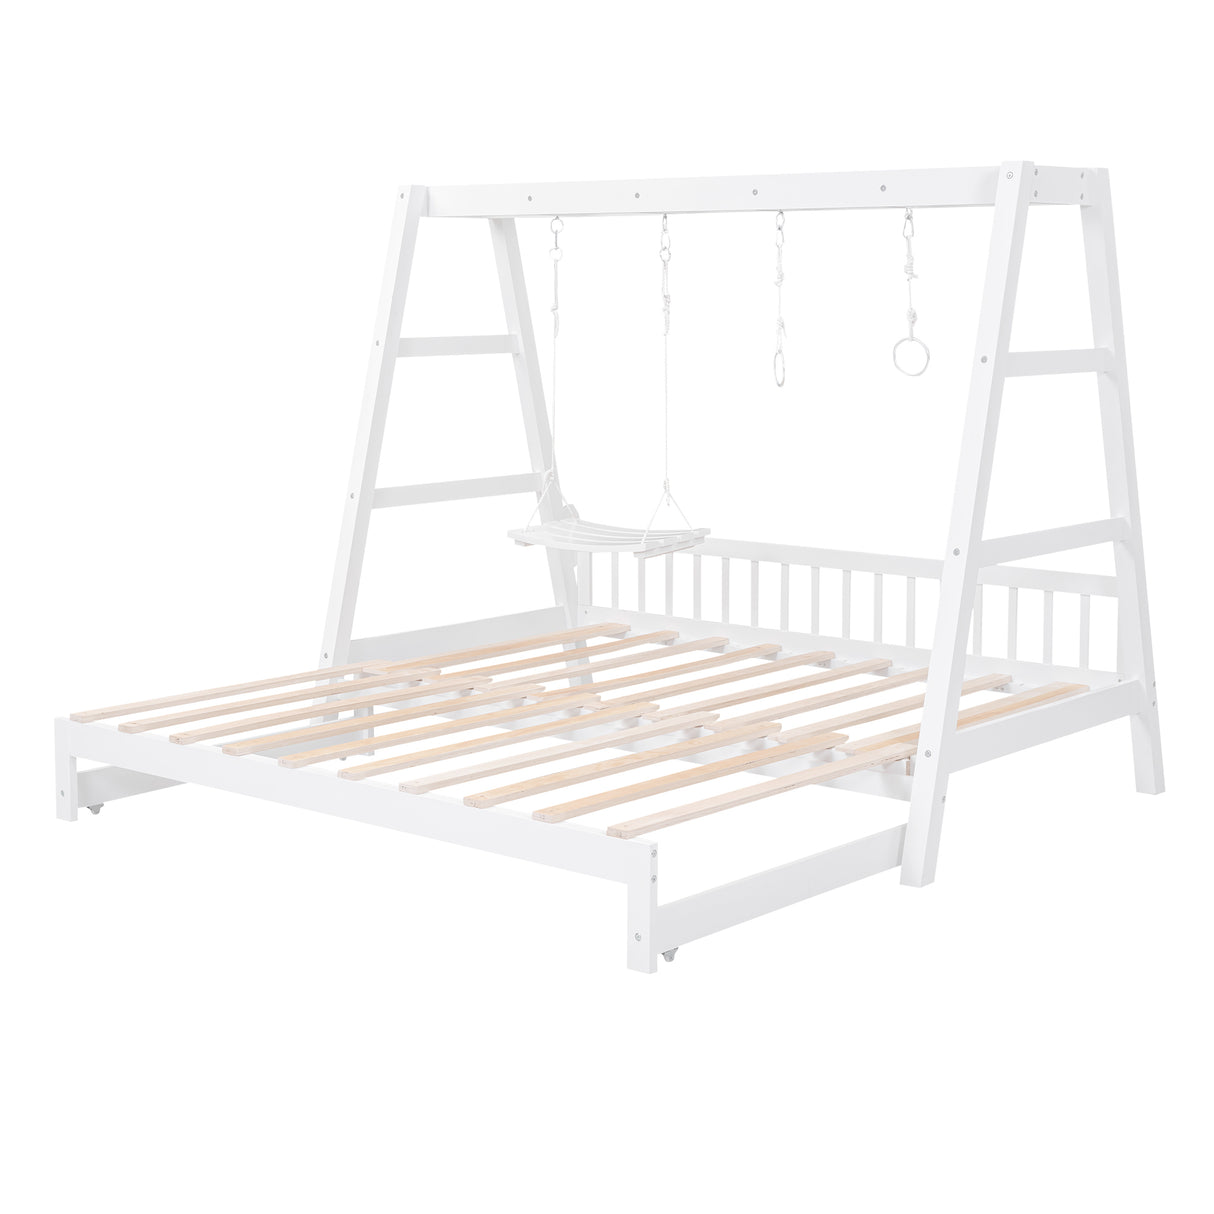 Extendable Twin Daybed with Swing and Handles, Wooden Platform Bed Frame  with Pull Out Bed for Toddlers Kids, Twin Size Daybed with Wood Slat  Support for Kids Bedroom, White 